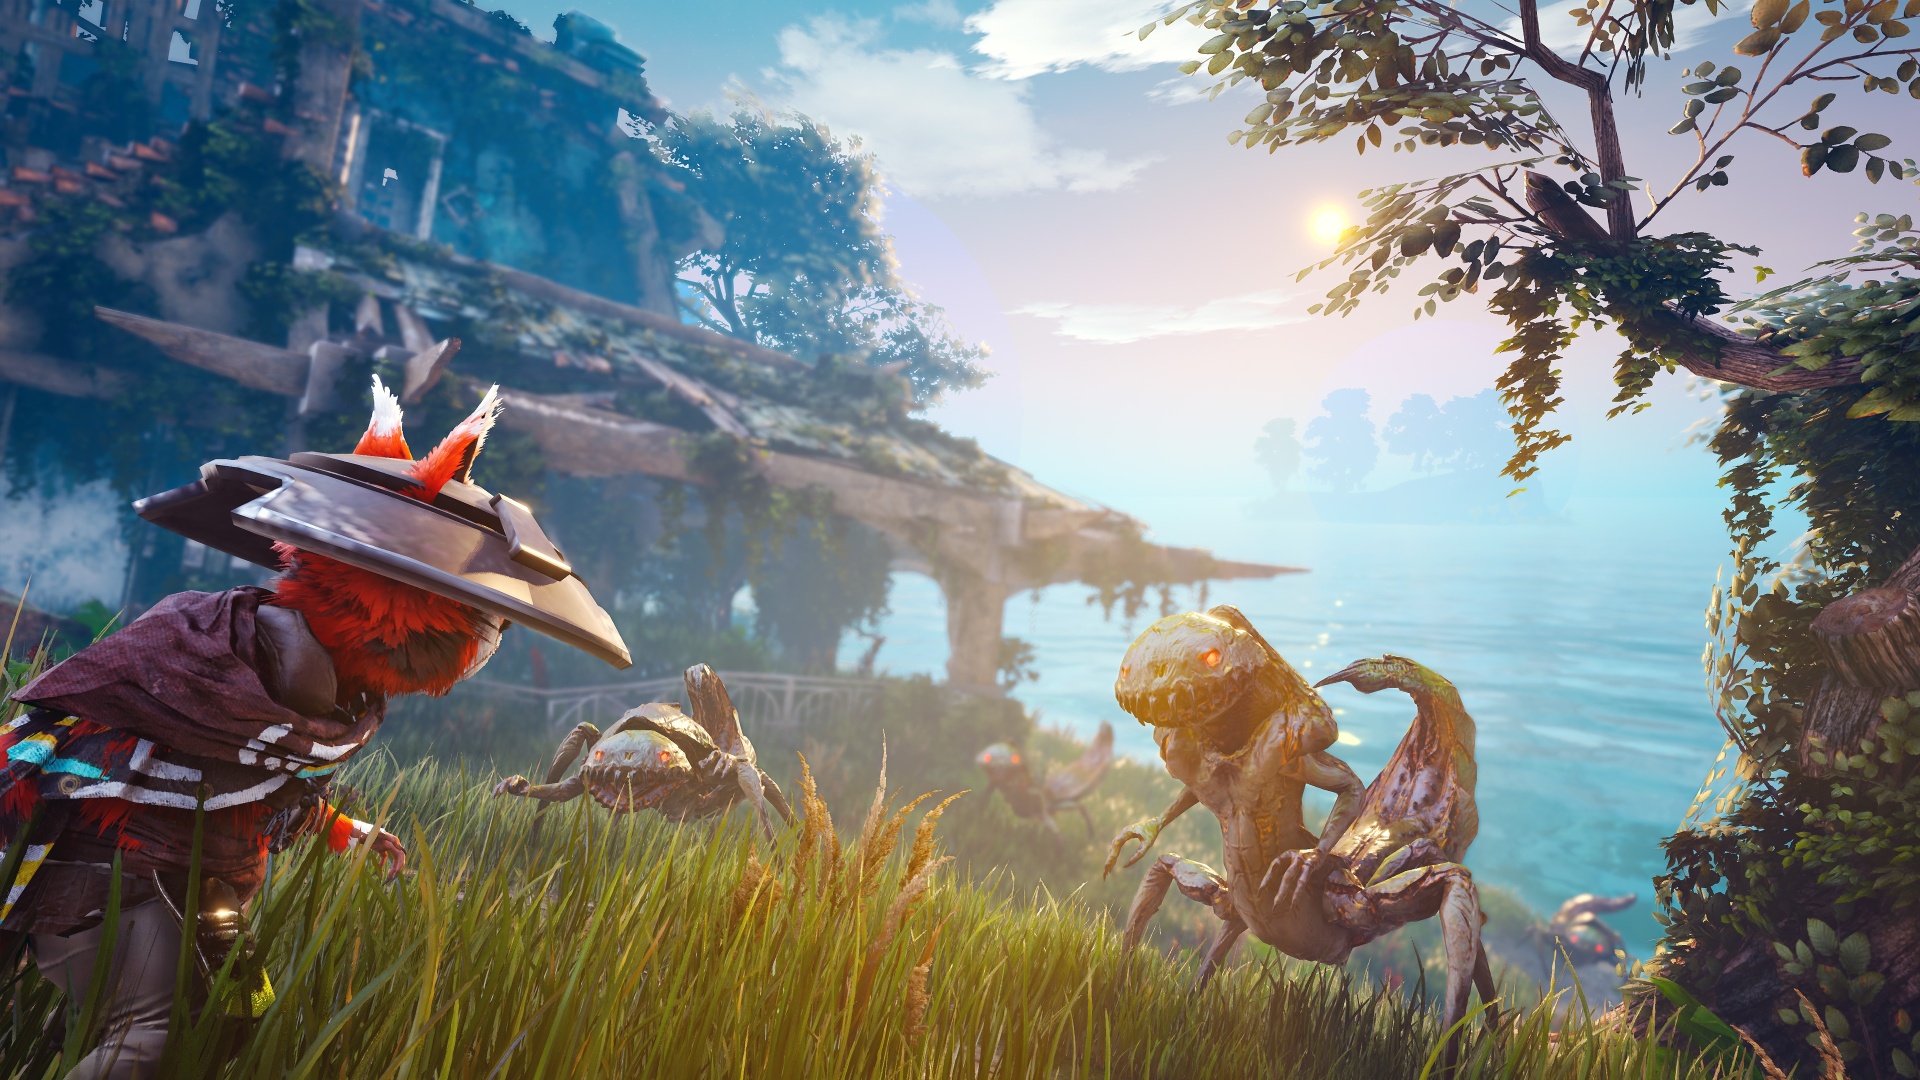 Biomutant, Darksiders III and Fade to Silence Will Be DRM-Free on Release